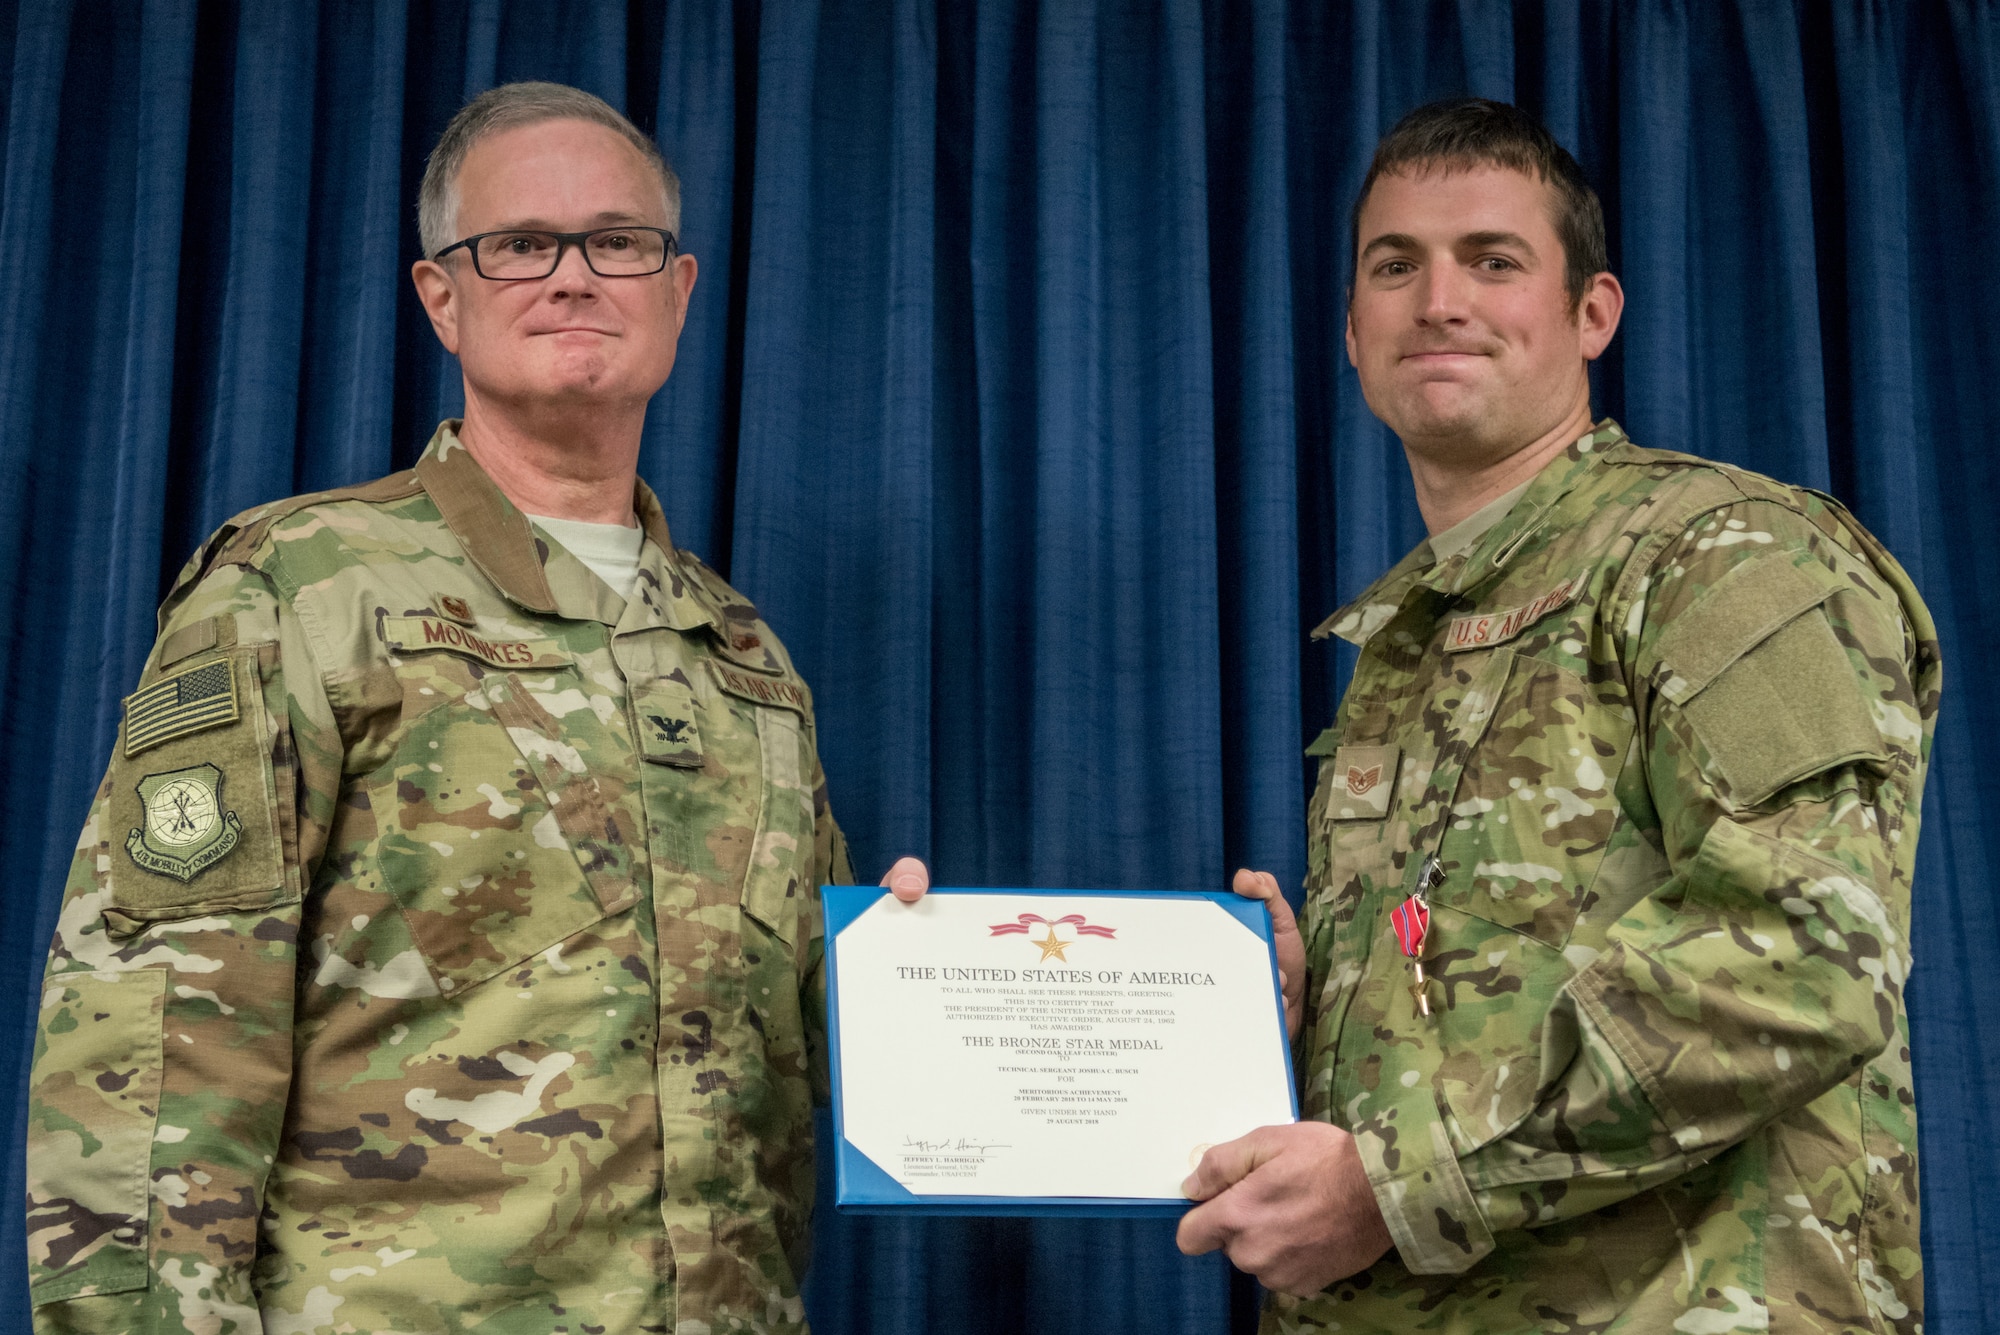 Tech. Sgt. Joshua C. Busch (right), a combat controller for the 123rd Special Tactics Squadron, receives the Bronze Star Medal from Col. David Mounkes, commander of the 123rd Airlift Wing, during a ceremony at the Kentucky Air National Guard Base in Louisville, Ky., Nov. 17, 2018. Busch distinguished himself for meritorious service with his participation in Operations Freedom’s Sentinel and Resolute Support. From February to May 2018, Busch served as a key senior tactical advisor for 17 ground combat operations, leading and coordinating 42 air-to-ground engagements while under enemy fire, directly resulting in 33 enemies killed in action. (U.S. Air National Guard photo by Staff Sgt. Joshua Horton)